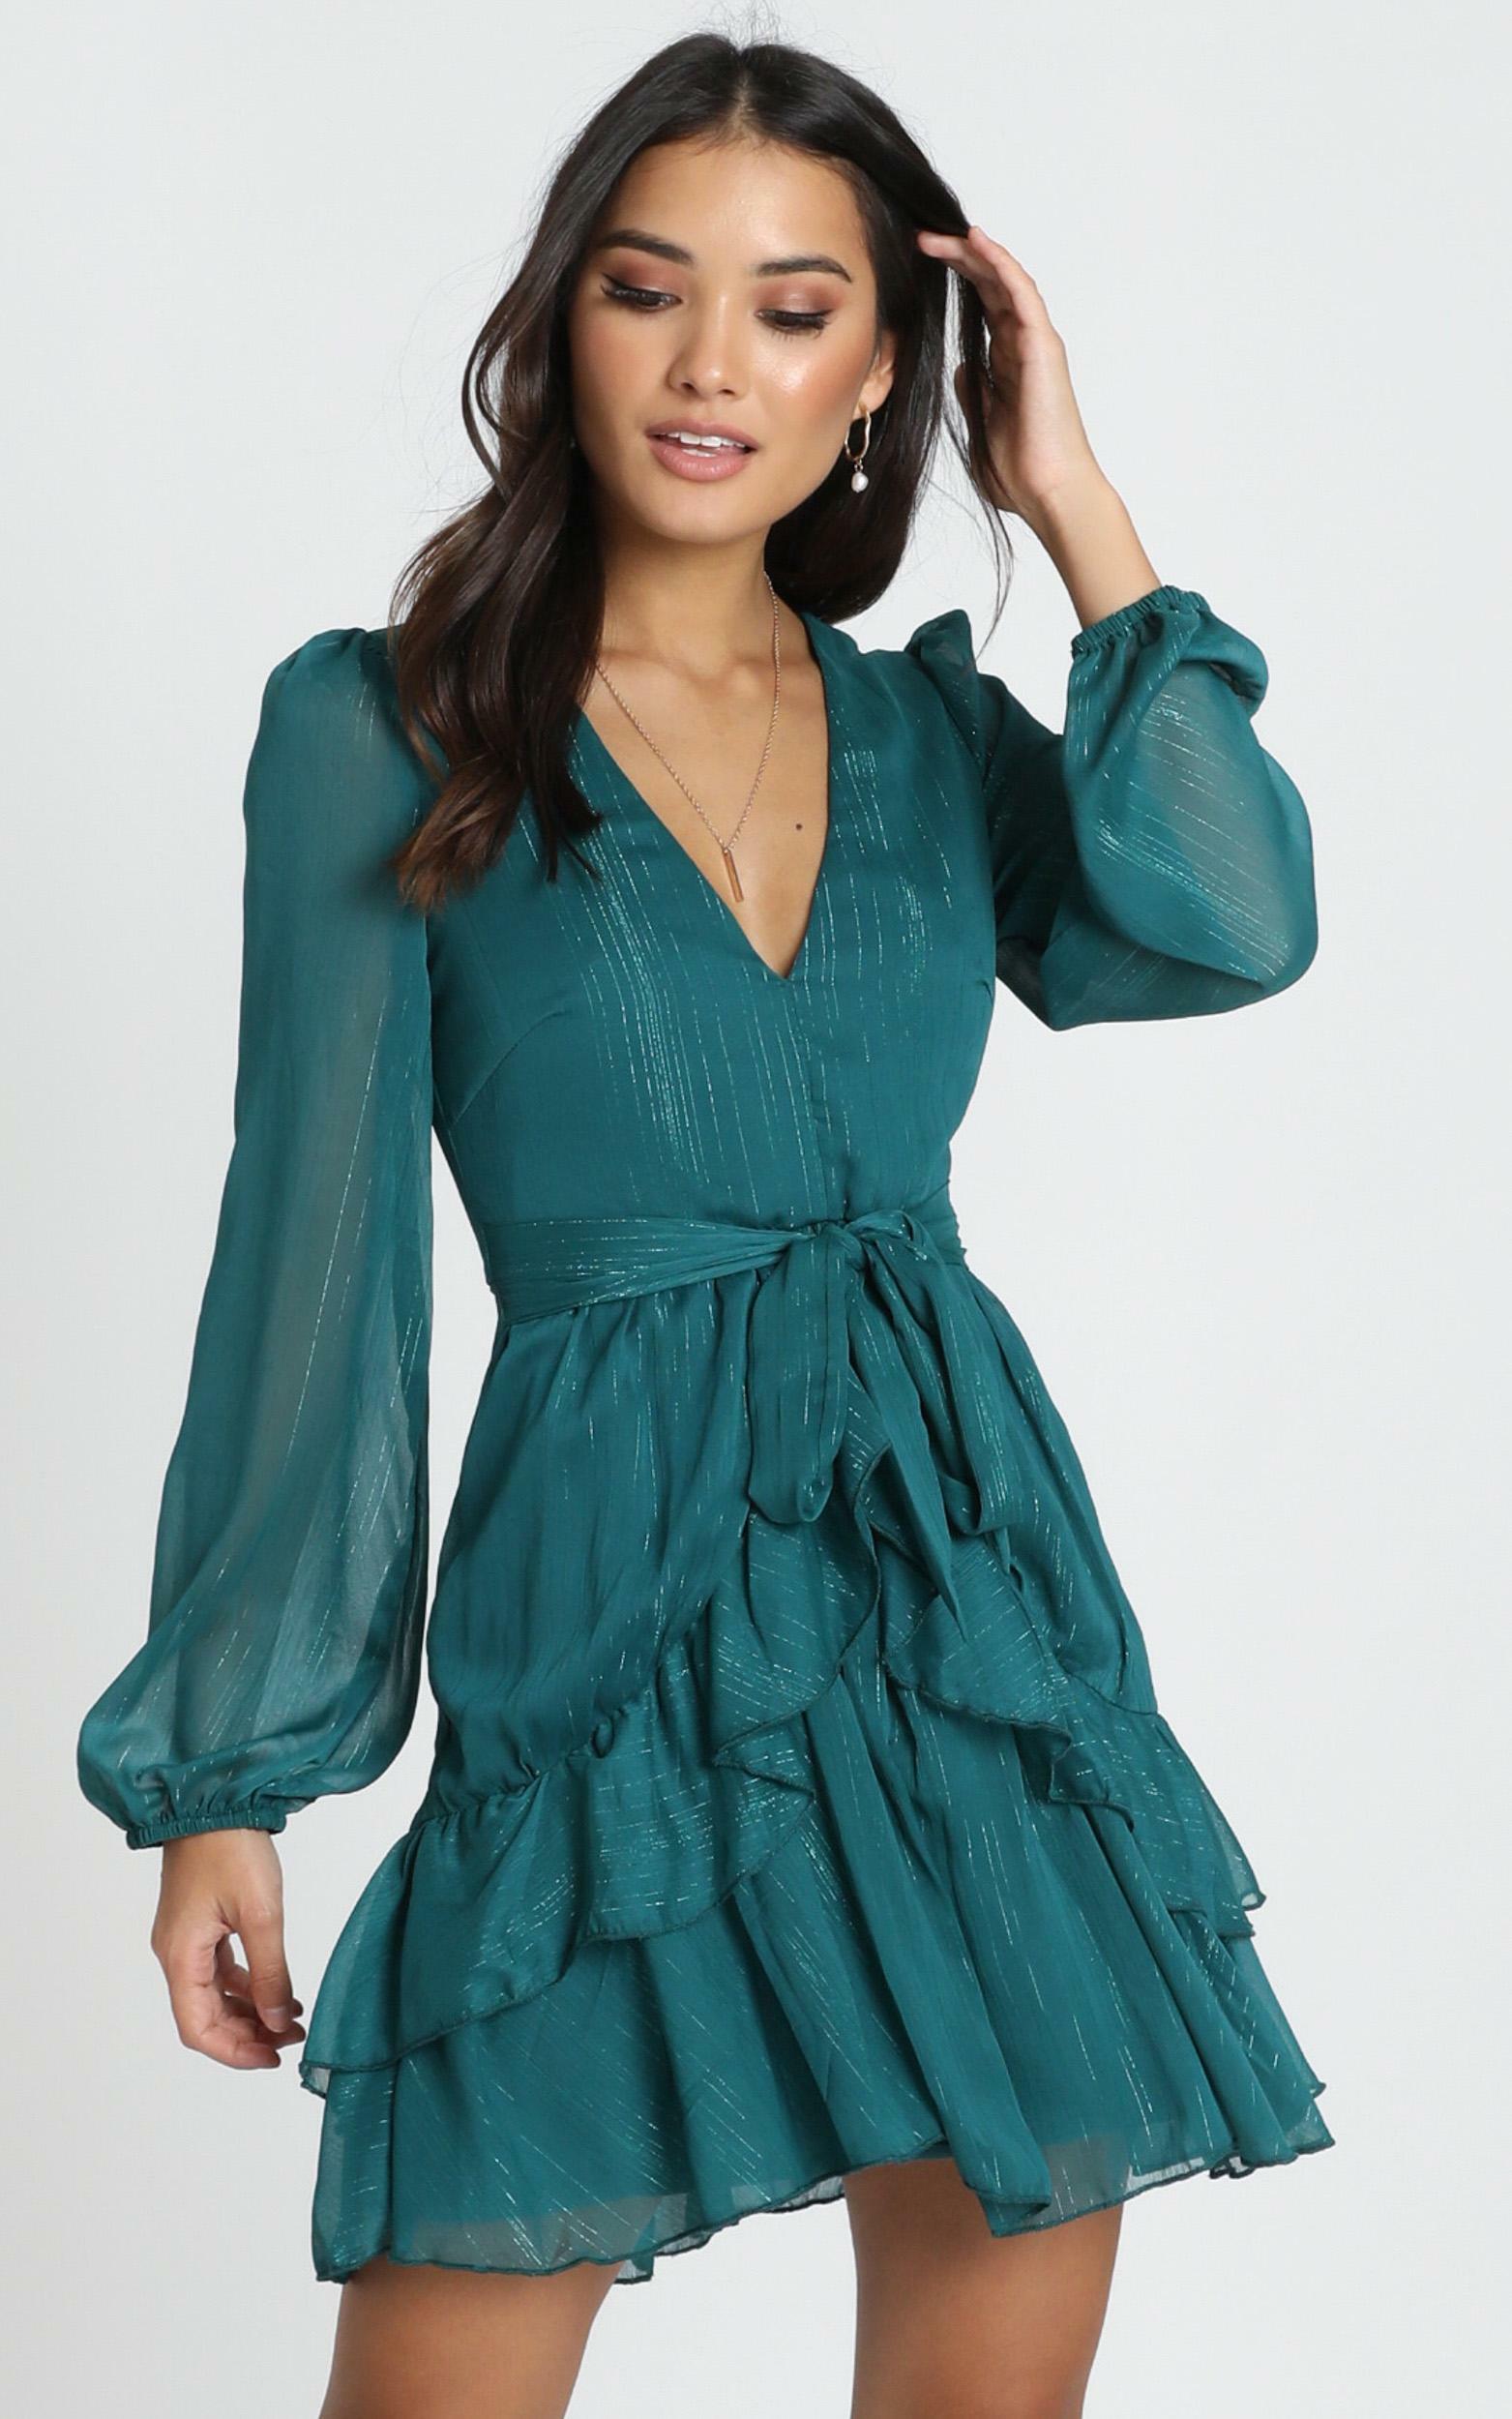 Eyes That Know Me Long Sleeve Ruffle Mini Dress in Teal - 20, GRN3, hi-res image number null